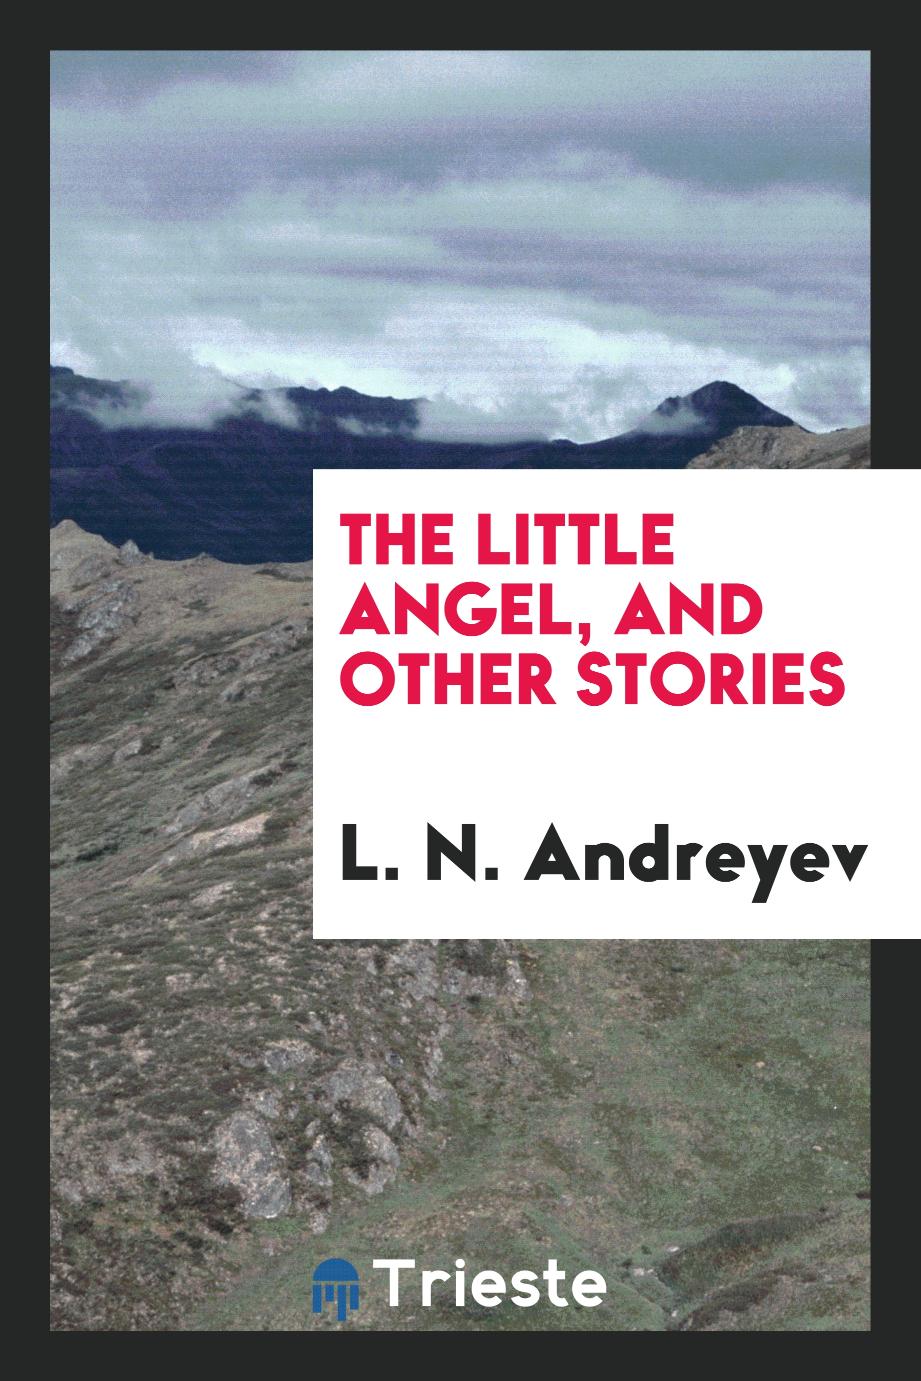 The little angel, and other stories